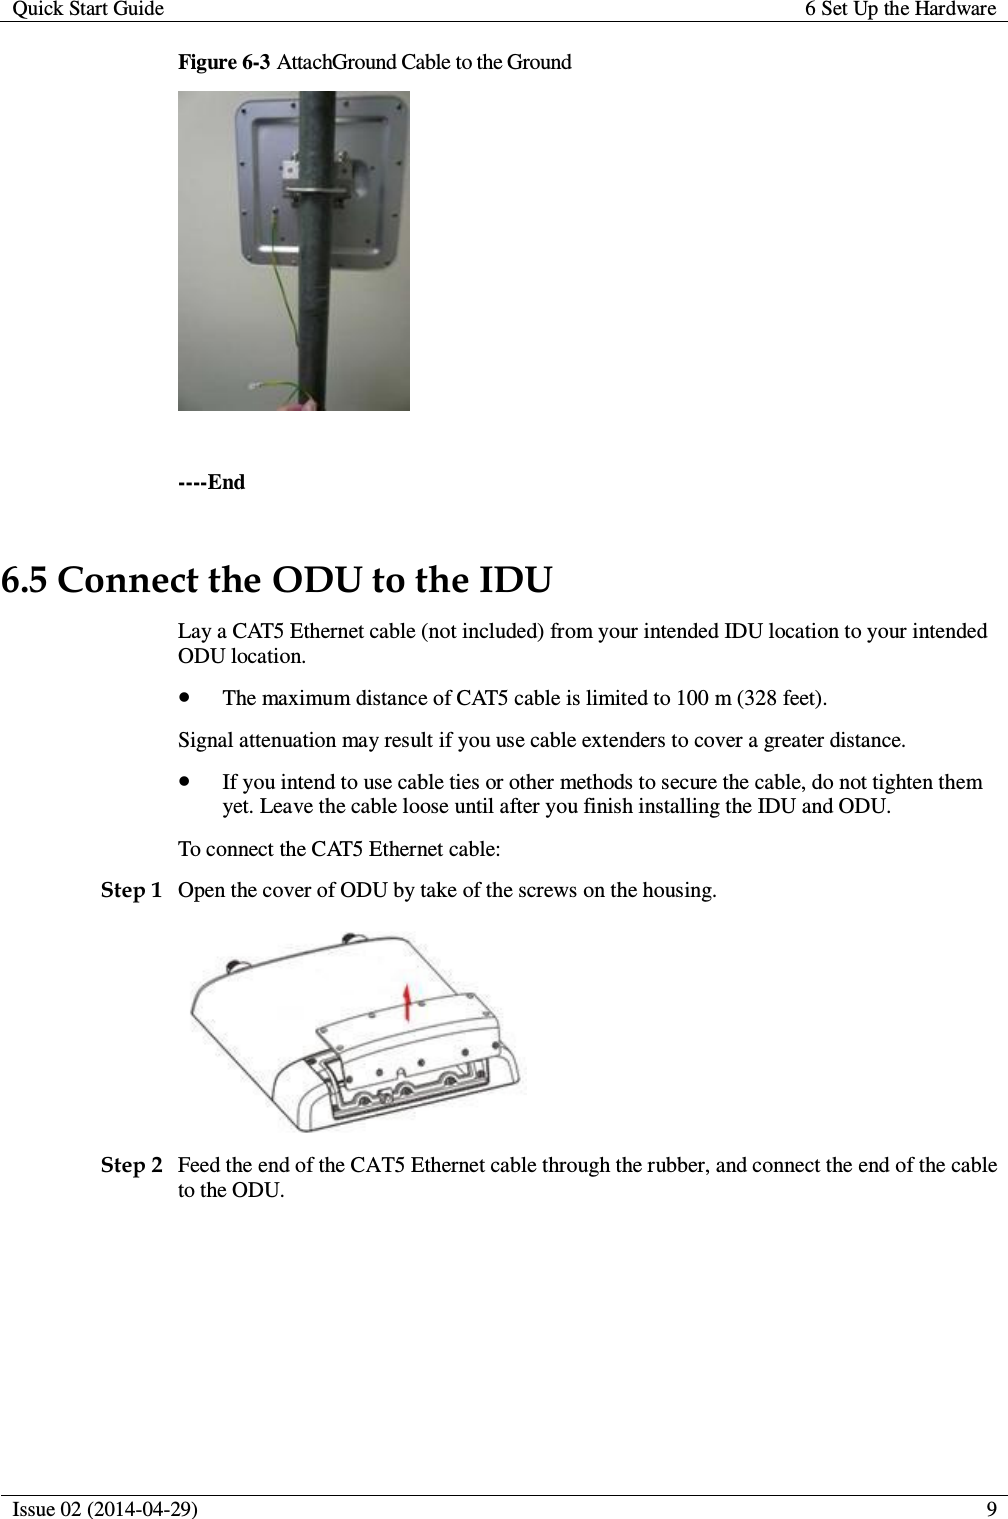 Quick Start Guide 6 Set Up the Hardware  Issue 02 (2014-04-29)  9  Figure 6-3 AttachGround Cable to the Ground   ----End 6.5 Connect the ODU to the IDU Lay a CAT5 Ethernet cable (not included) from your intended IDU location to your intended ODU location.  The maximum distance of CAT5 cable is limited to 100 m (328 feet). Signal attenuation may result if you use cable extenders to cover a greater distance.  If you intend to use cable ties or other methods to secure the cable, do not tighten them yet. Leave the cable loose until after you finish installing the IDU and ODU. To connect the CAT5 Ethernet cable: Step 1 Open the cover of ODU by take of the screws on the housing.  Step 2 Feed the end of the CAT5 Ethernet cable through the rubber, and connect the end of the cable to the ODU. 